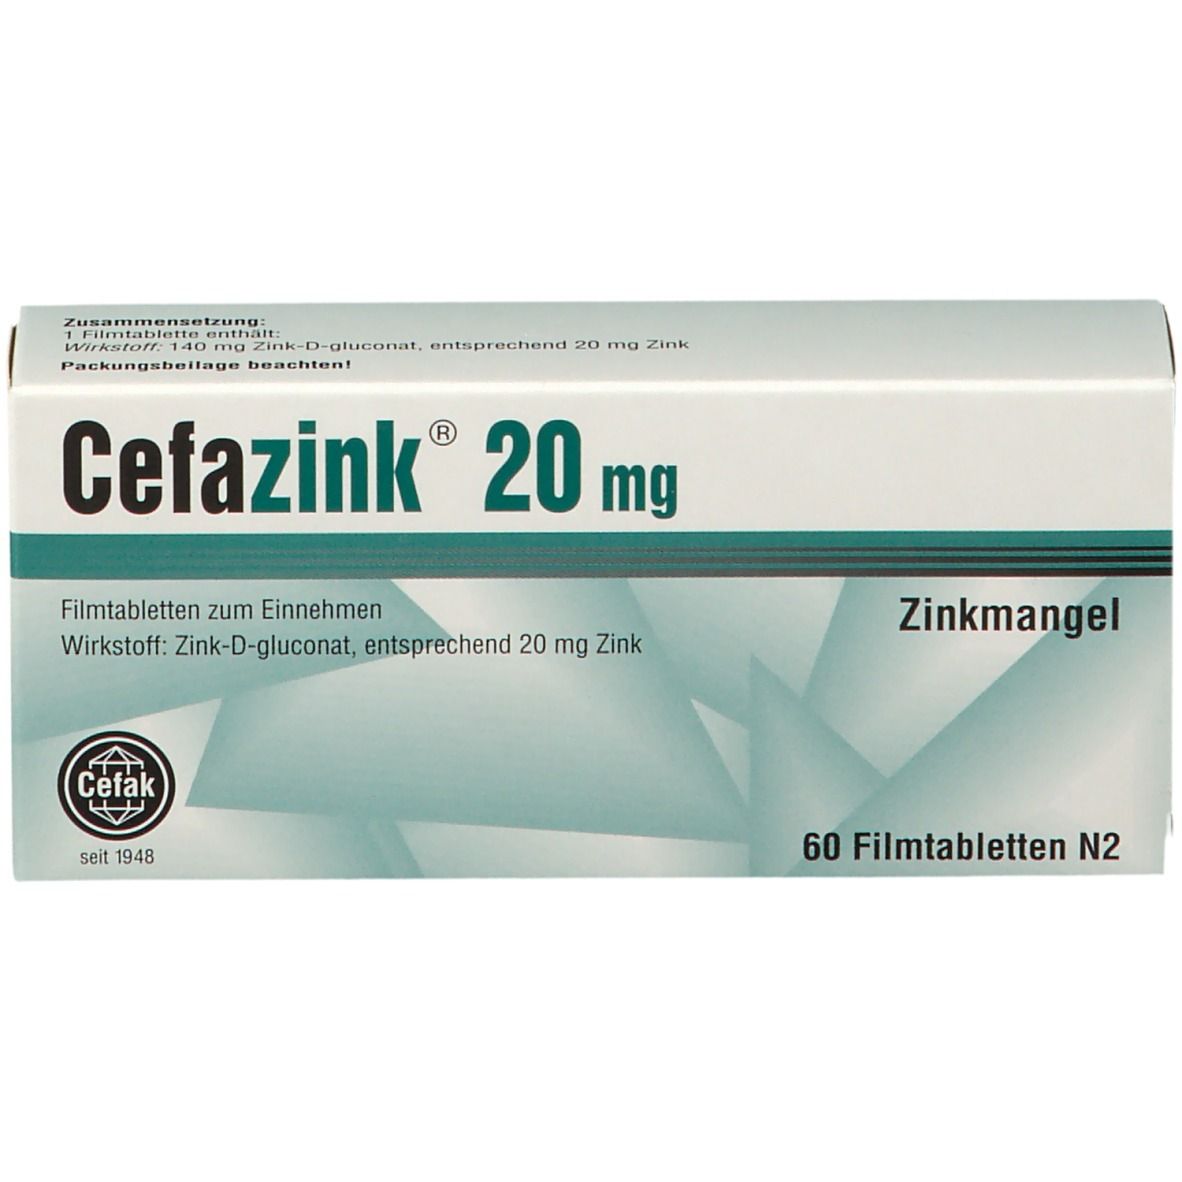 Cefazink® 20 mg